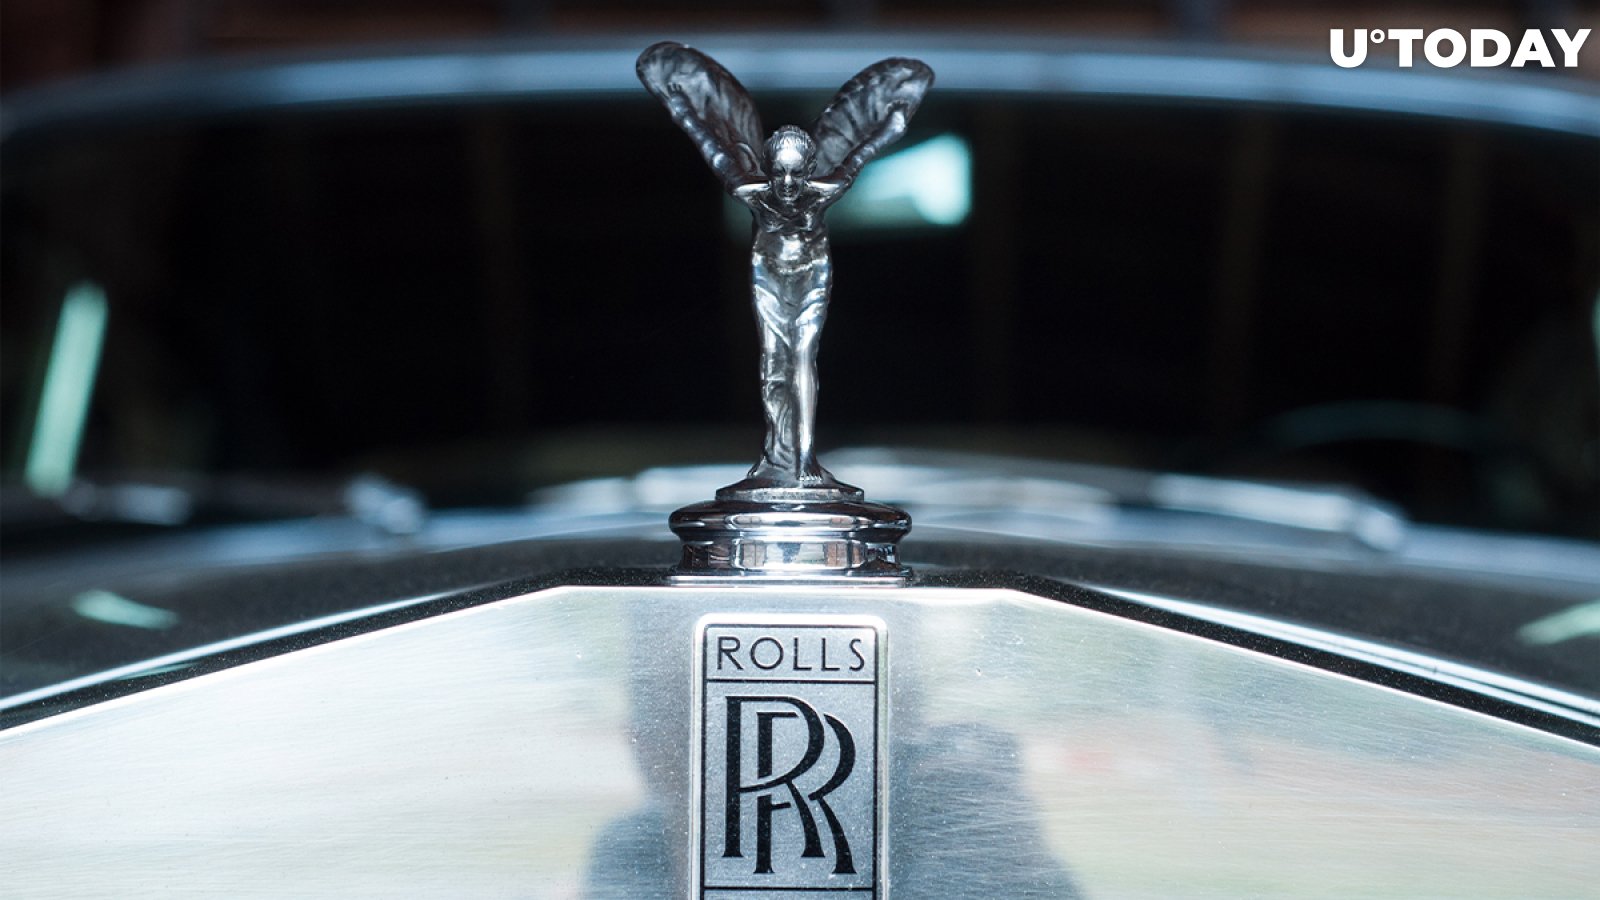 Rolls-Royce Debuts Car with Secret Encrypted Message 